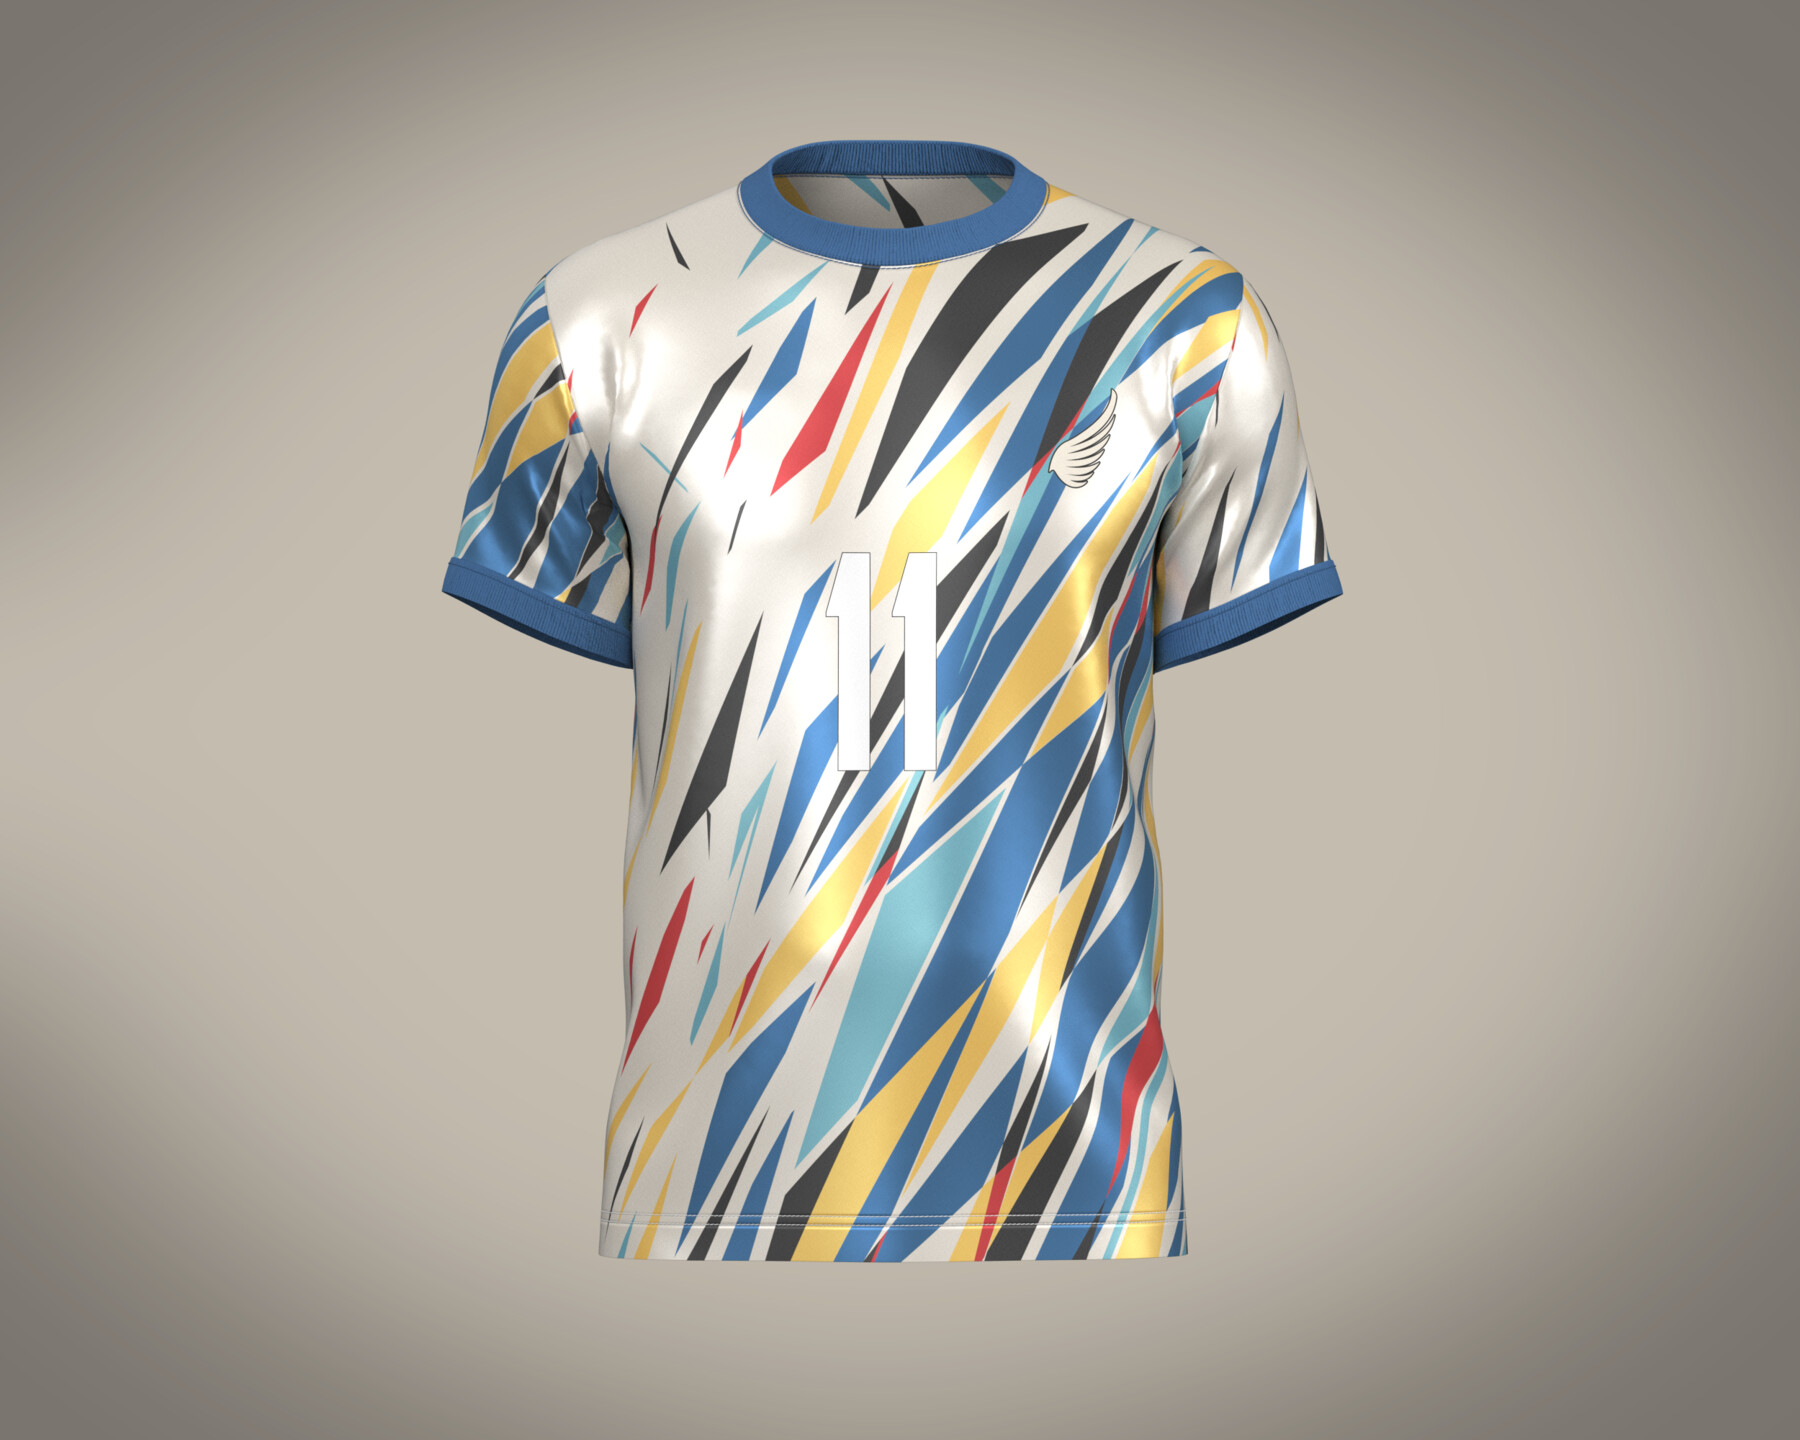 ArtStation - Soccer Football White with Multi colors Jersey Player-11